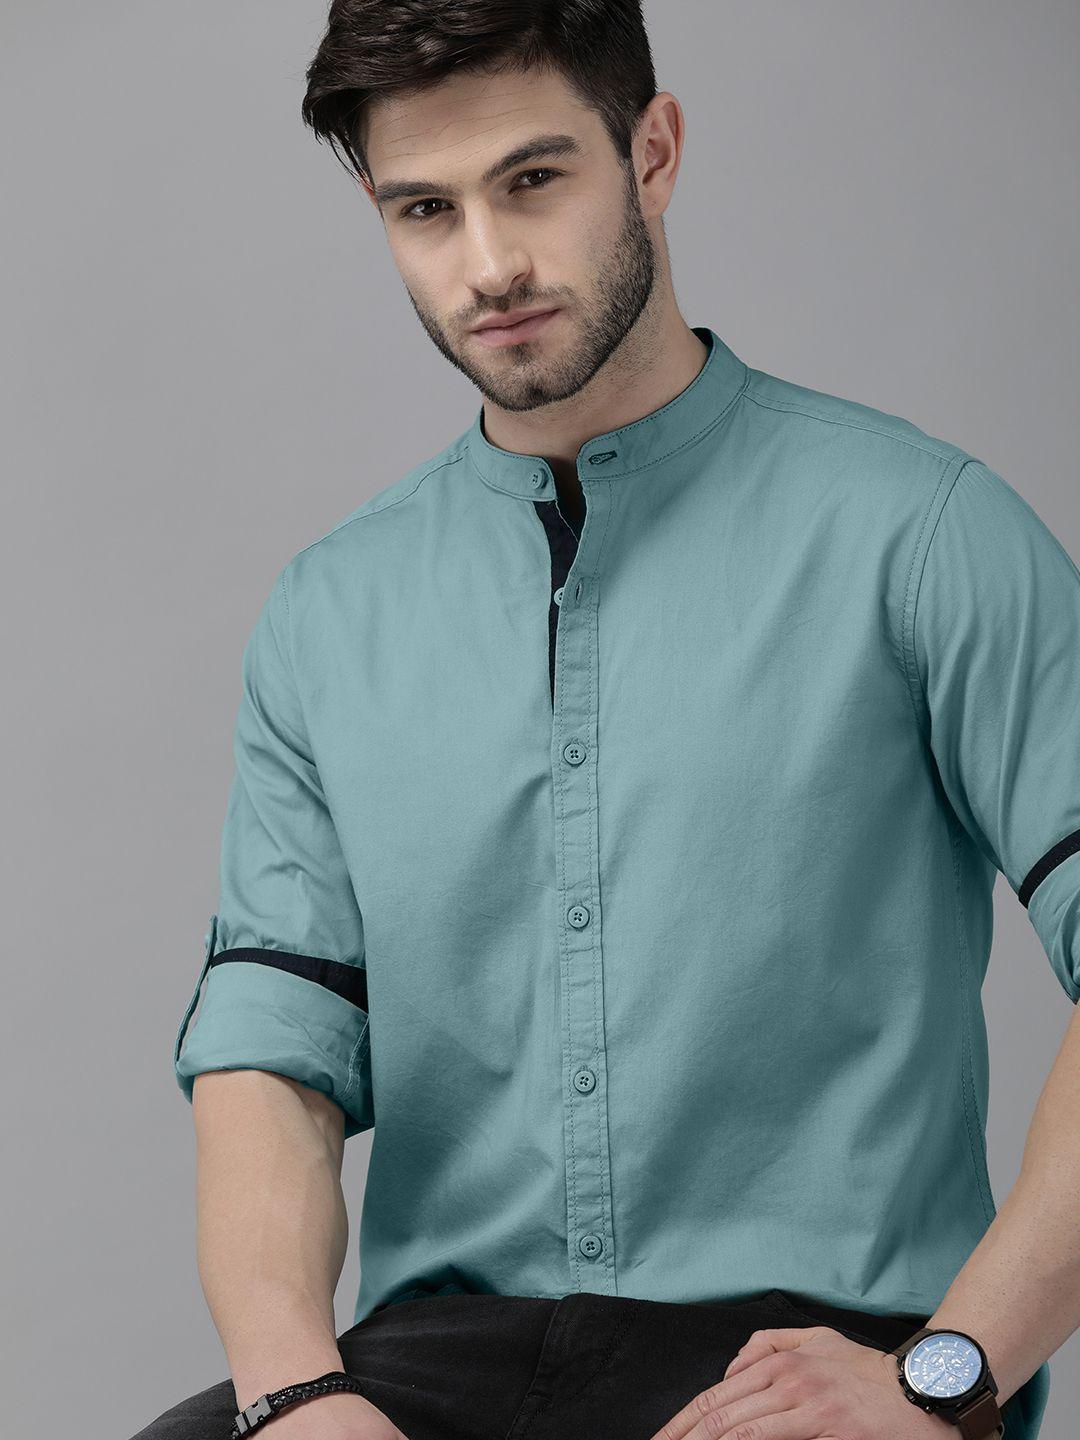 the roadster lifestyle co men green solid mandarin collared sustainable casual shirt